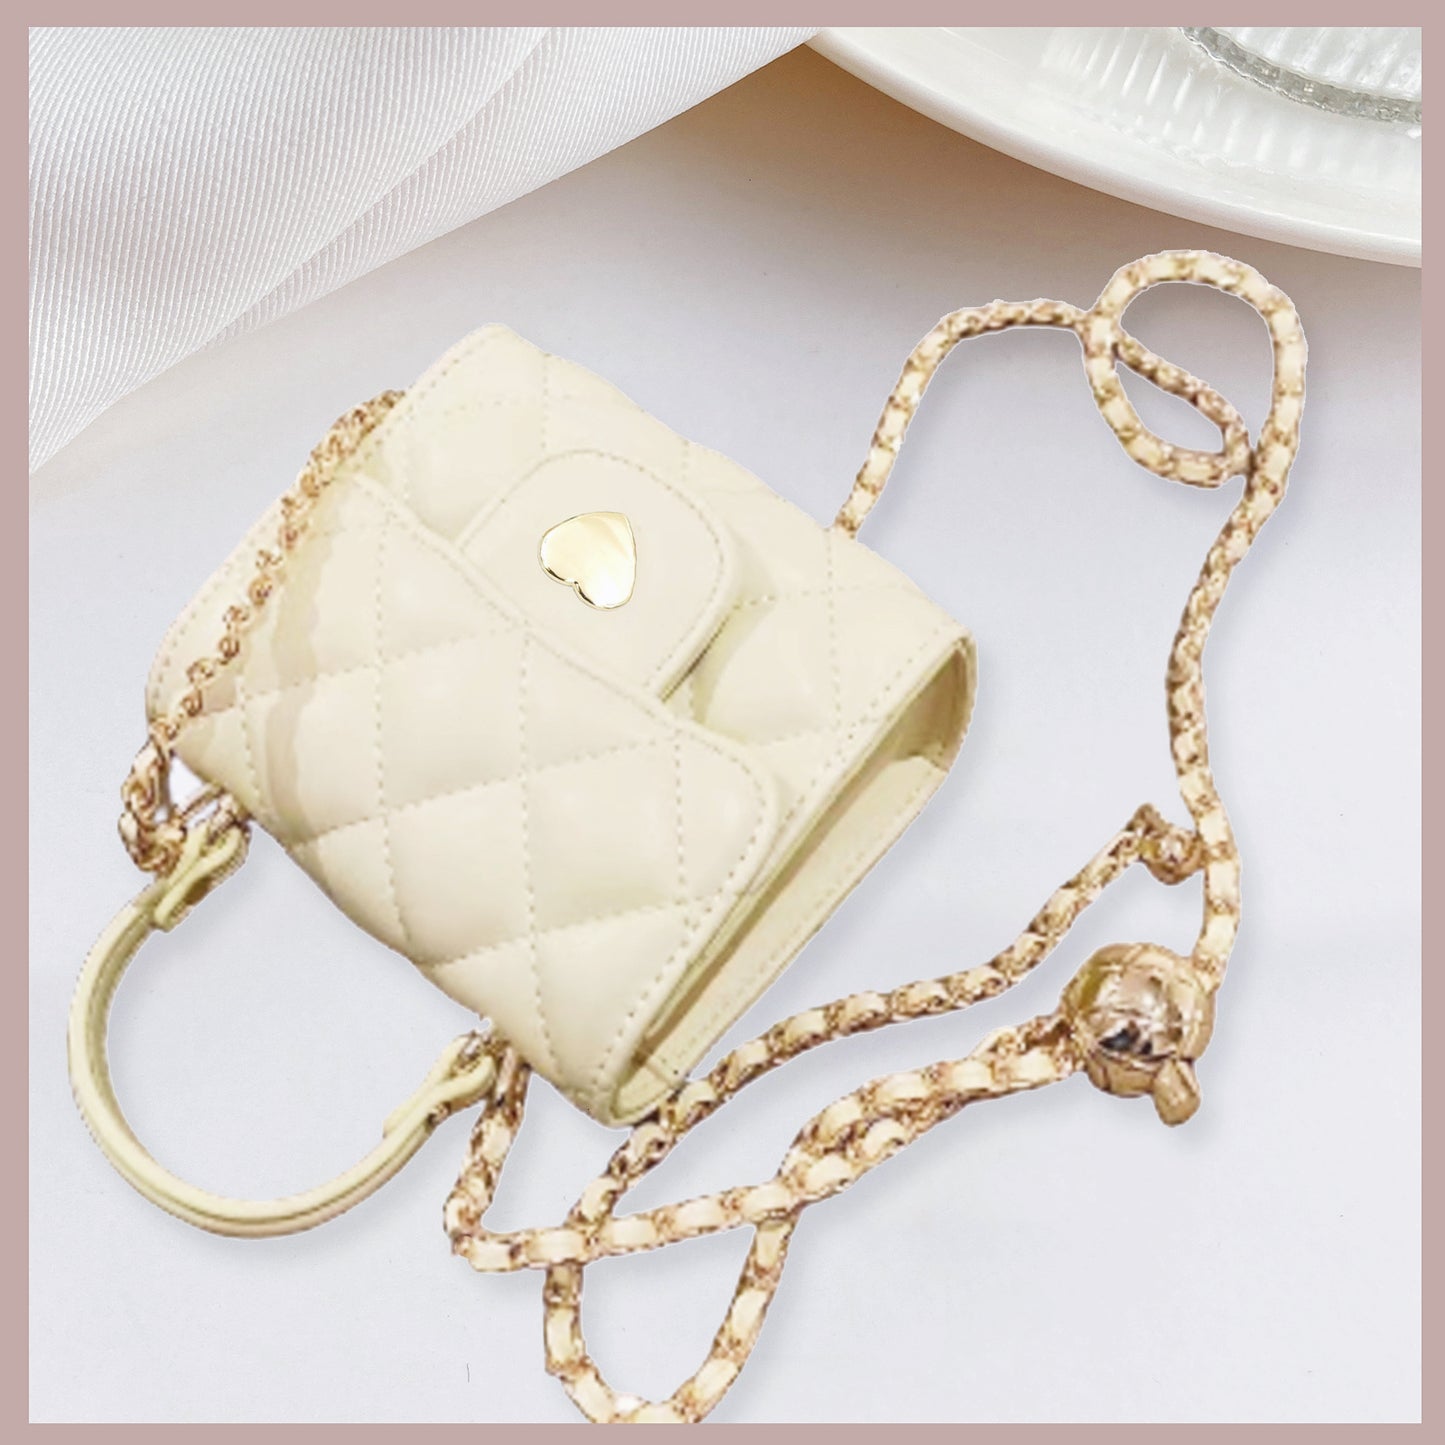 Small Crossbody Bags for Girls Women Purse Fashion Leather Top Handle Chain Strap Light Weight